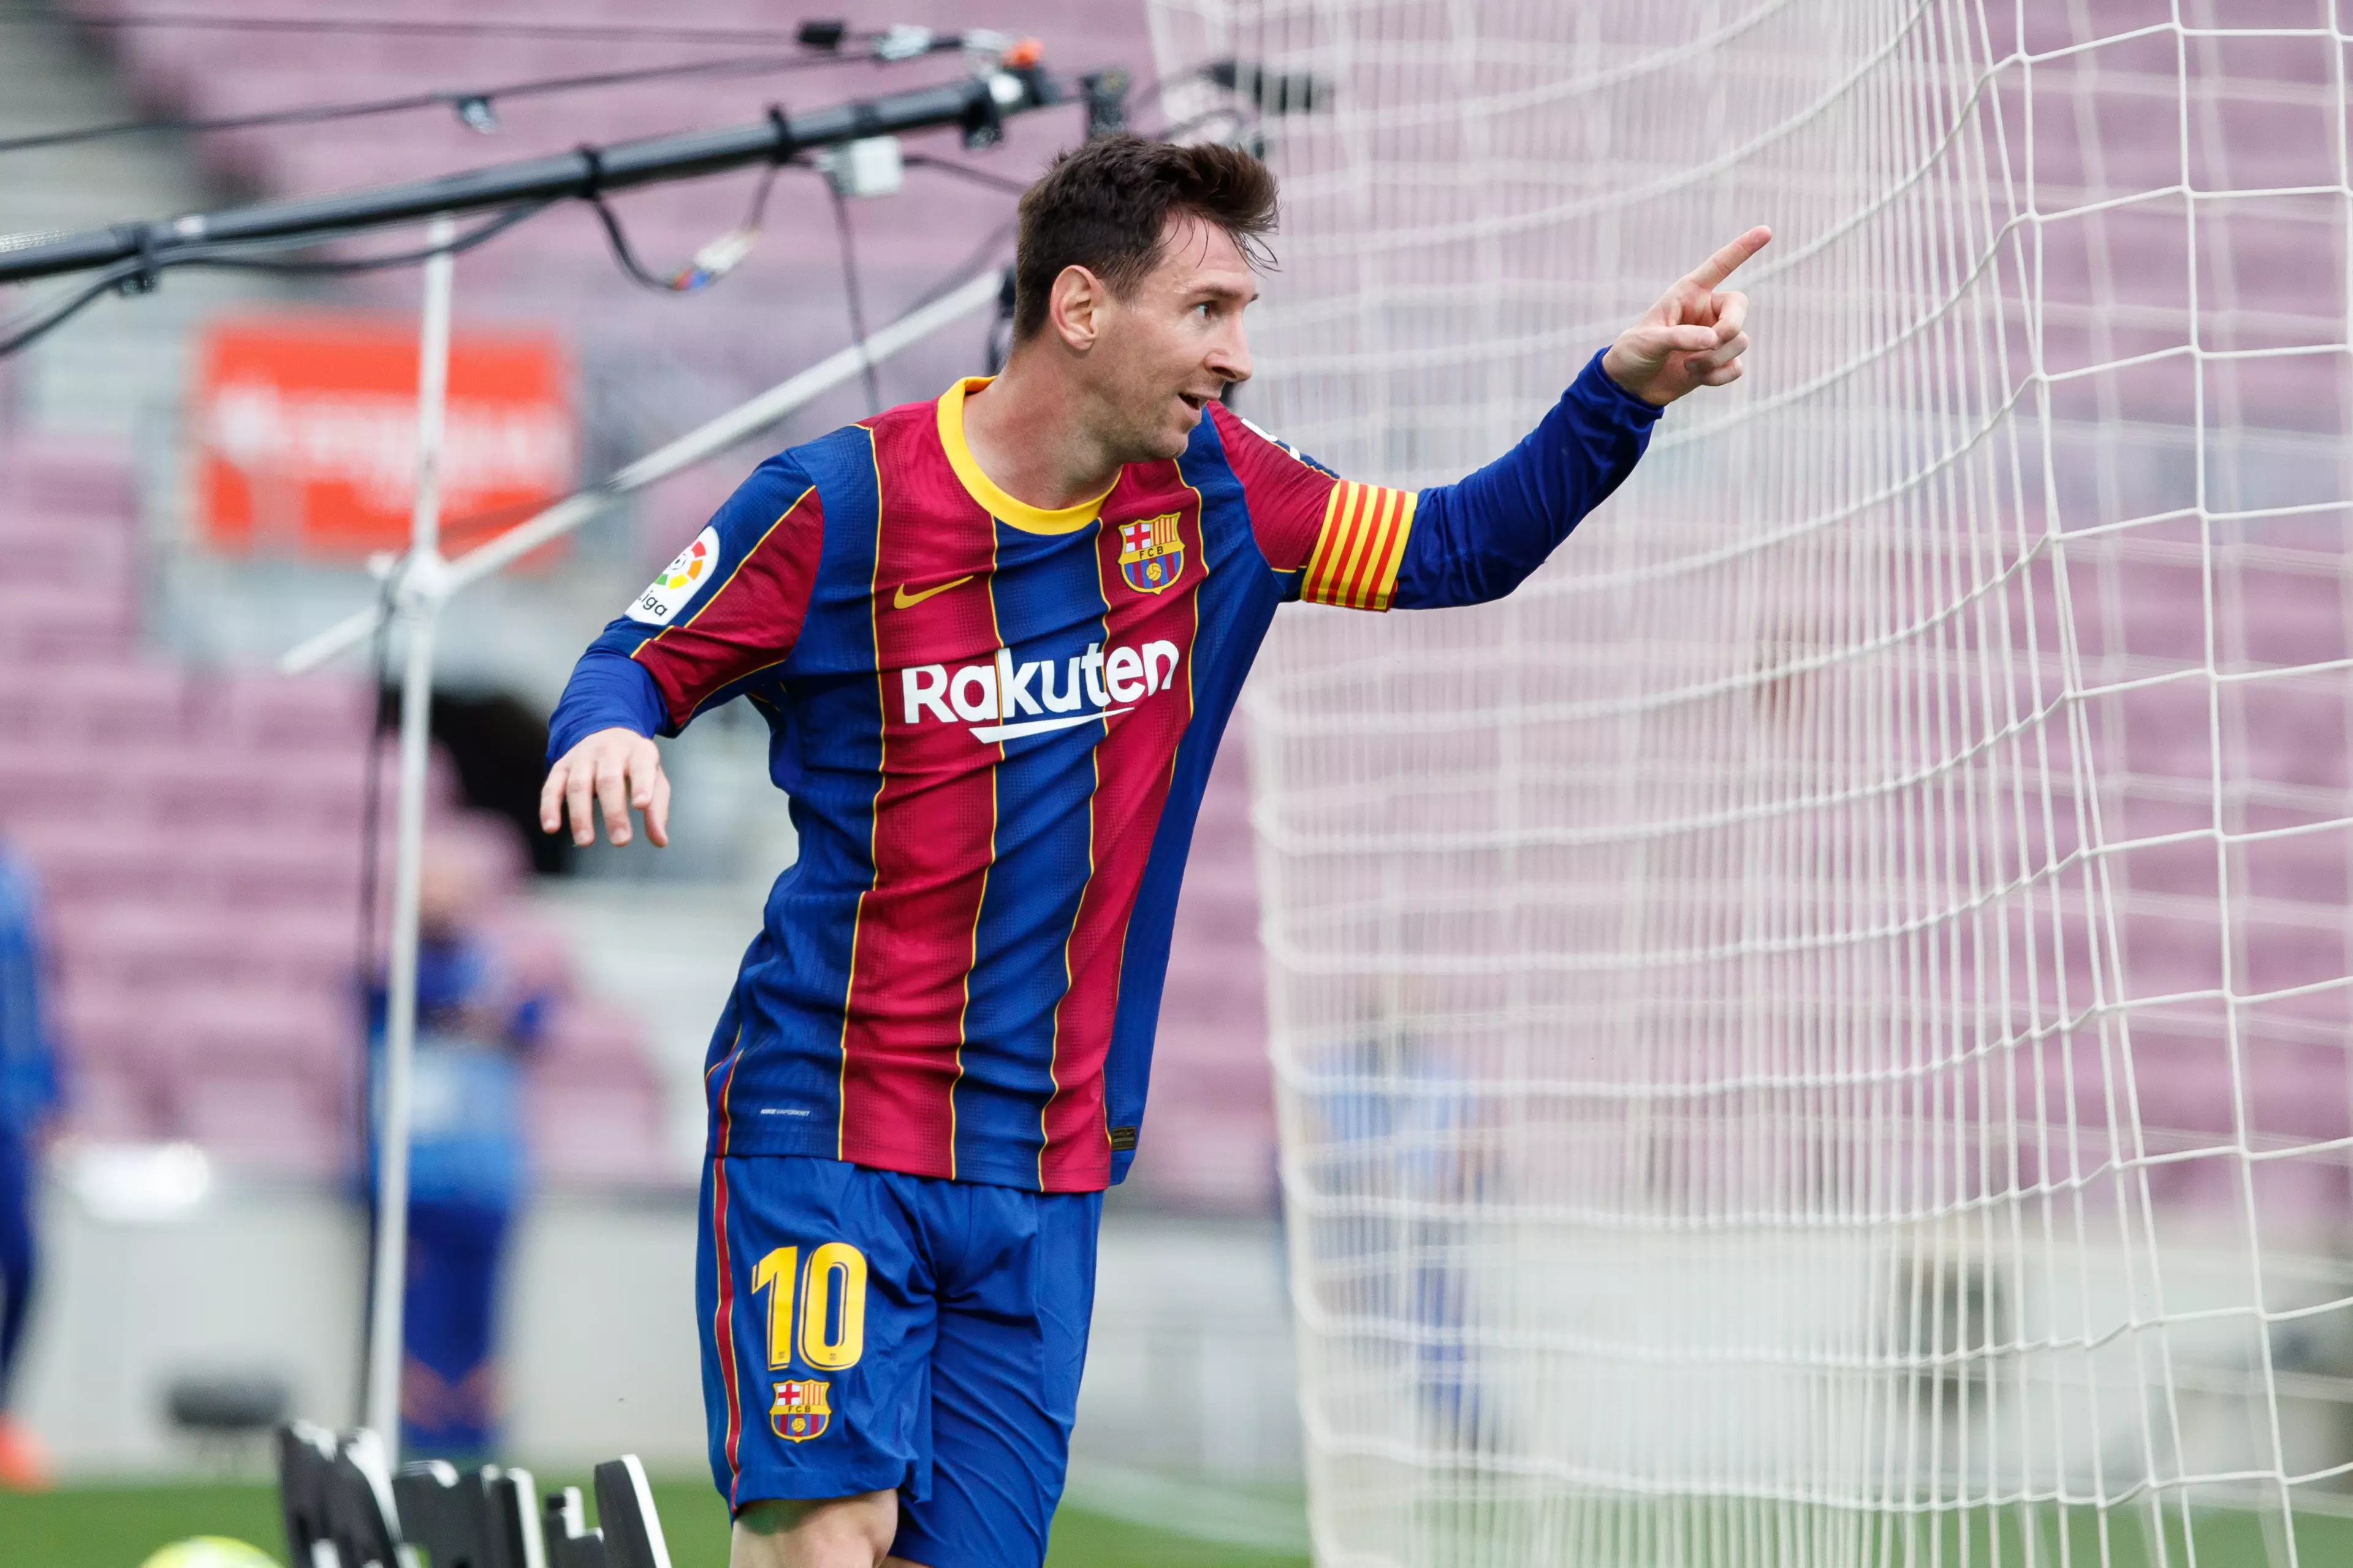 Messi was integral to Barcelona once again last season despite questions over his future persisting. Image: PA Images